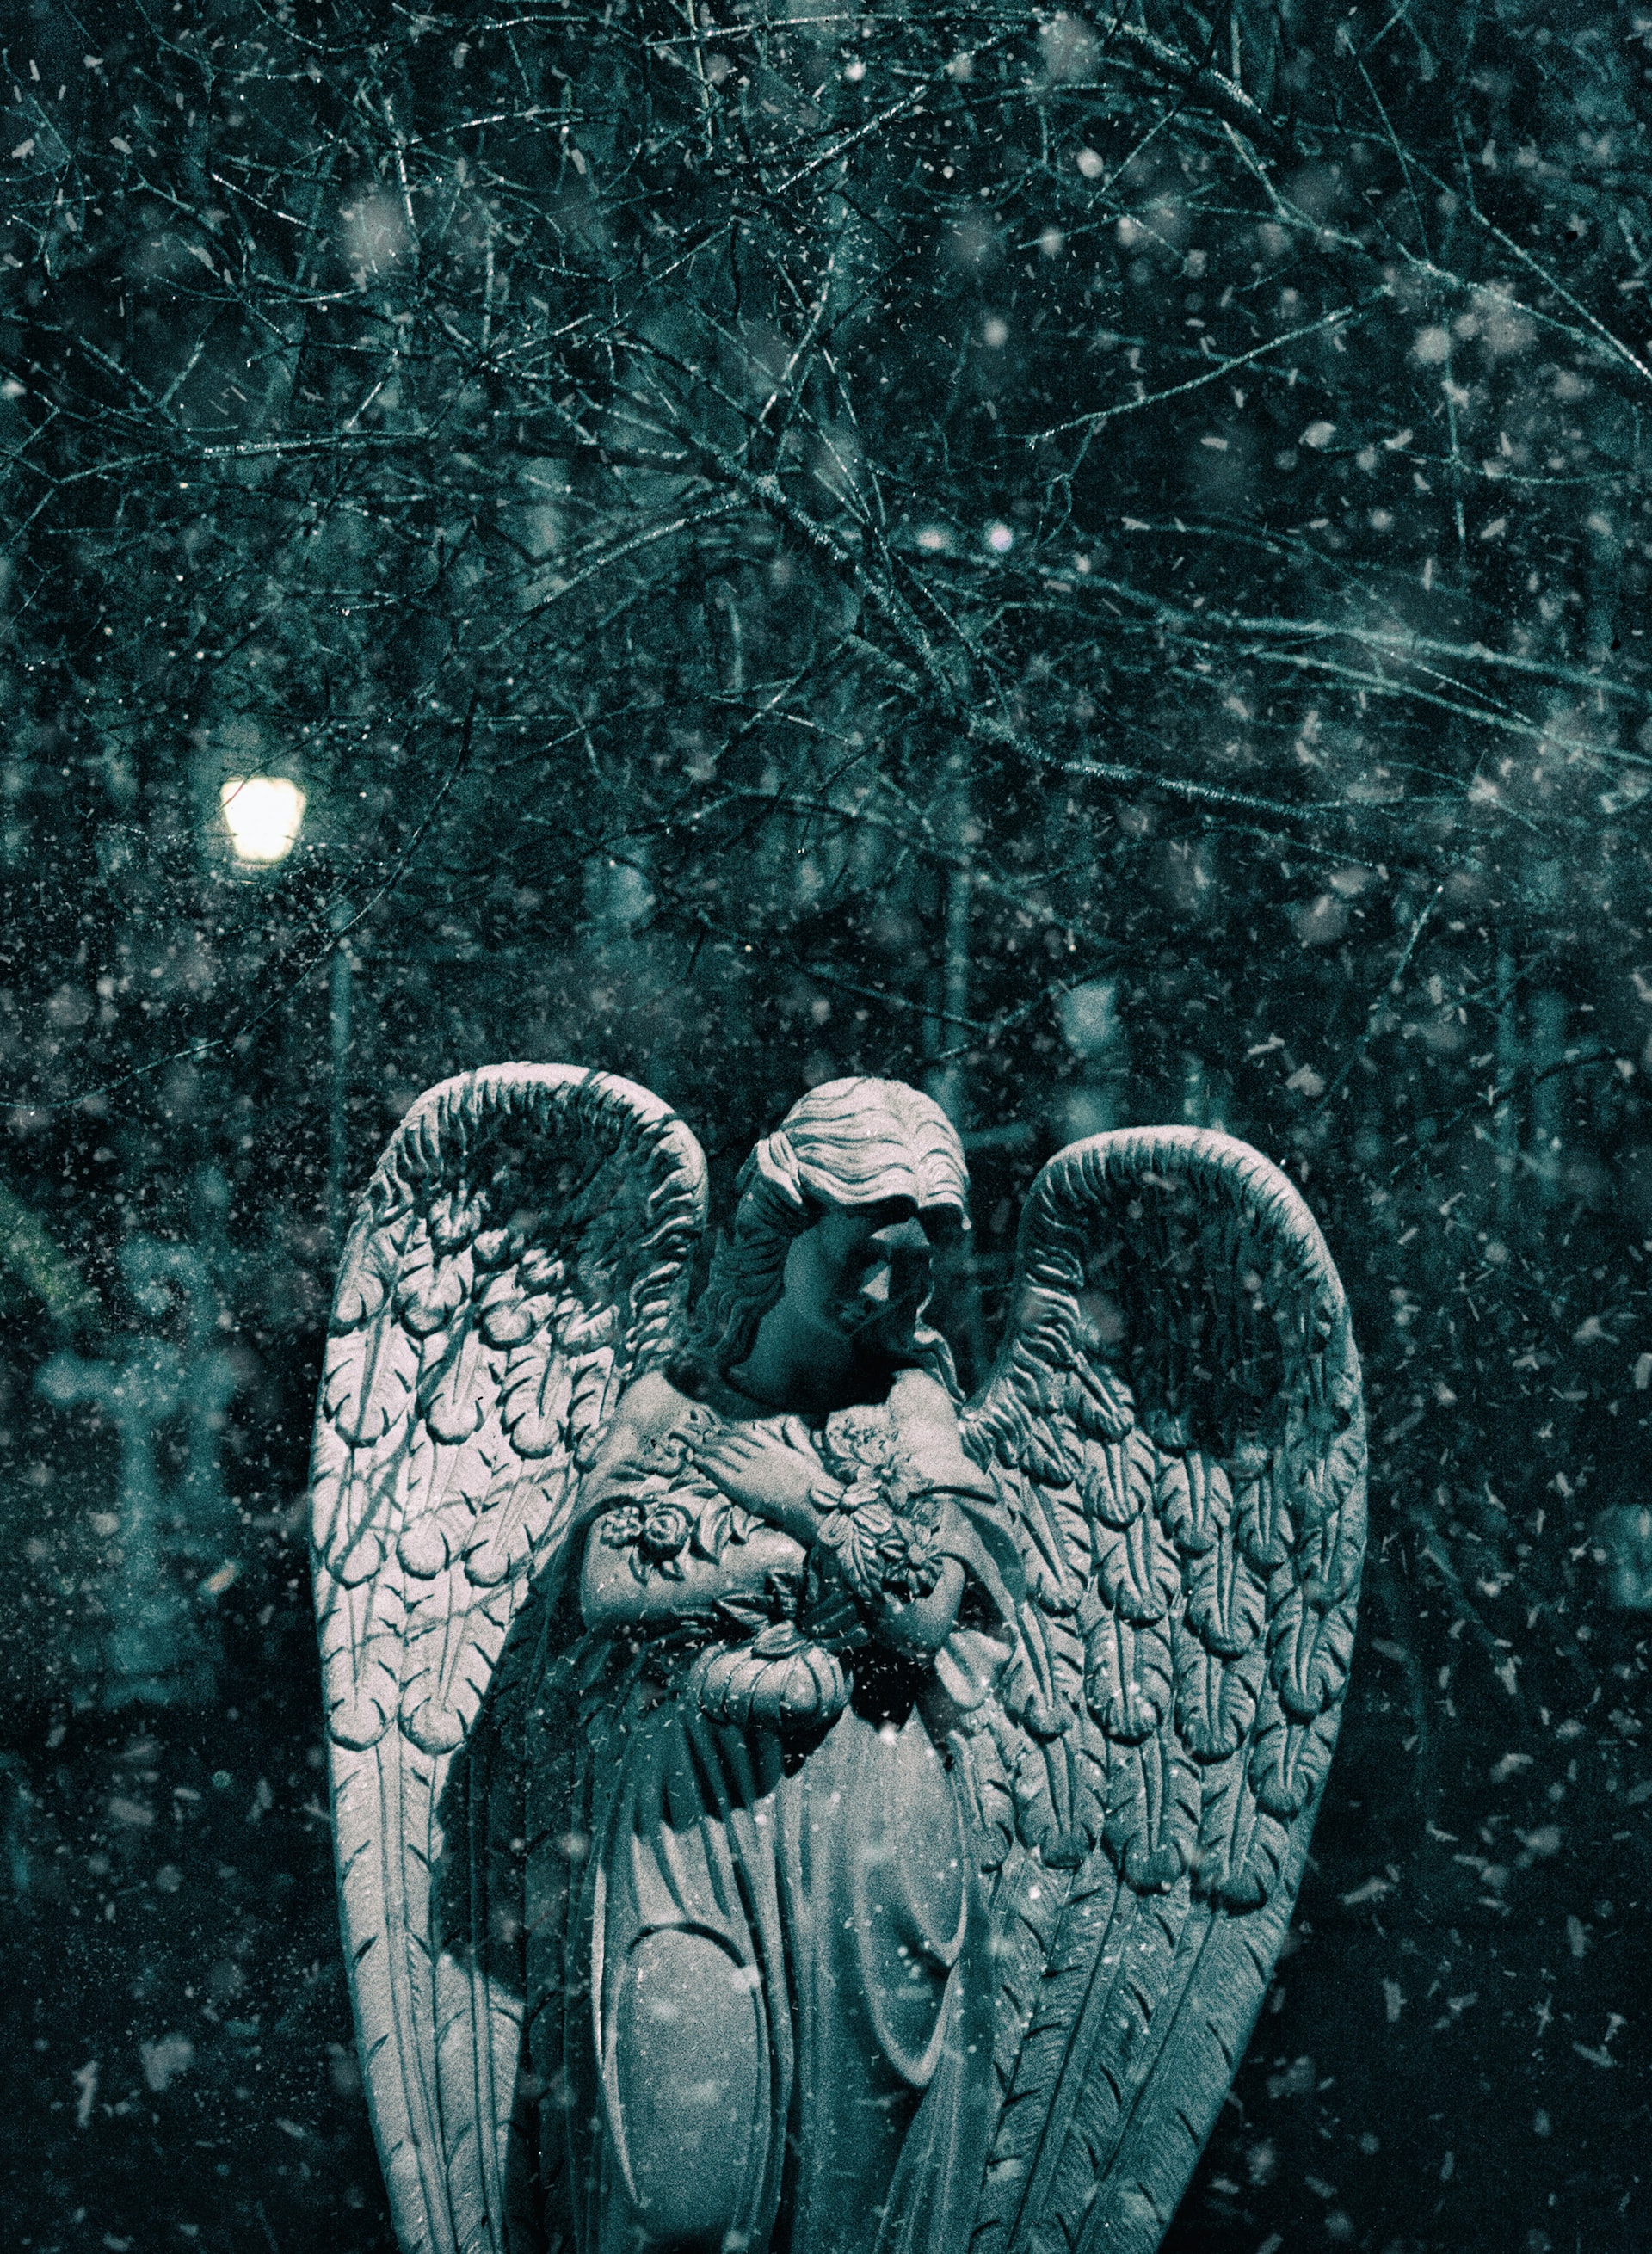 Angel Number For Luck - How They Can Help You Achieve Goals